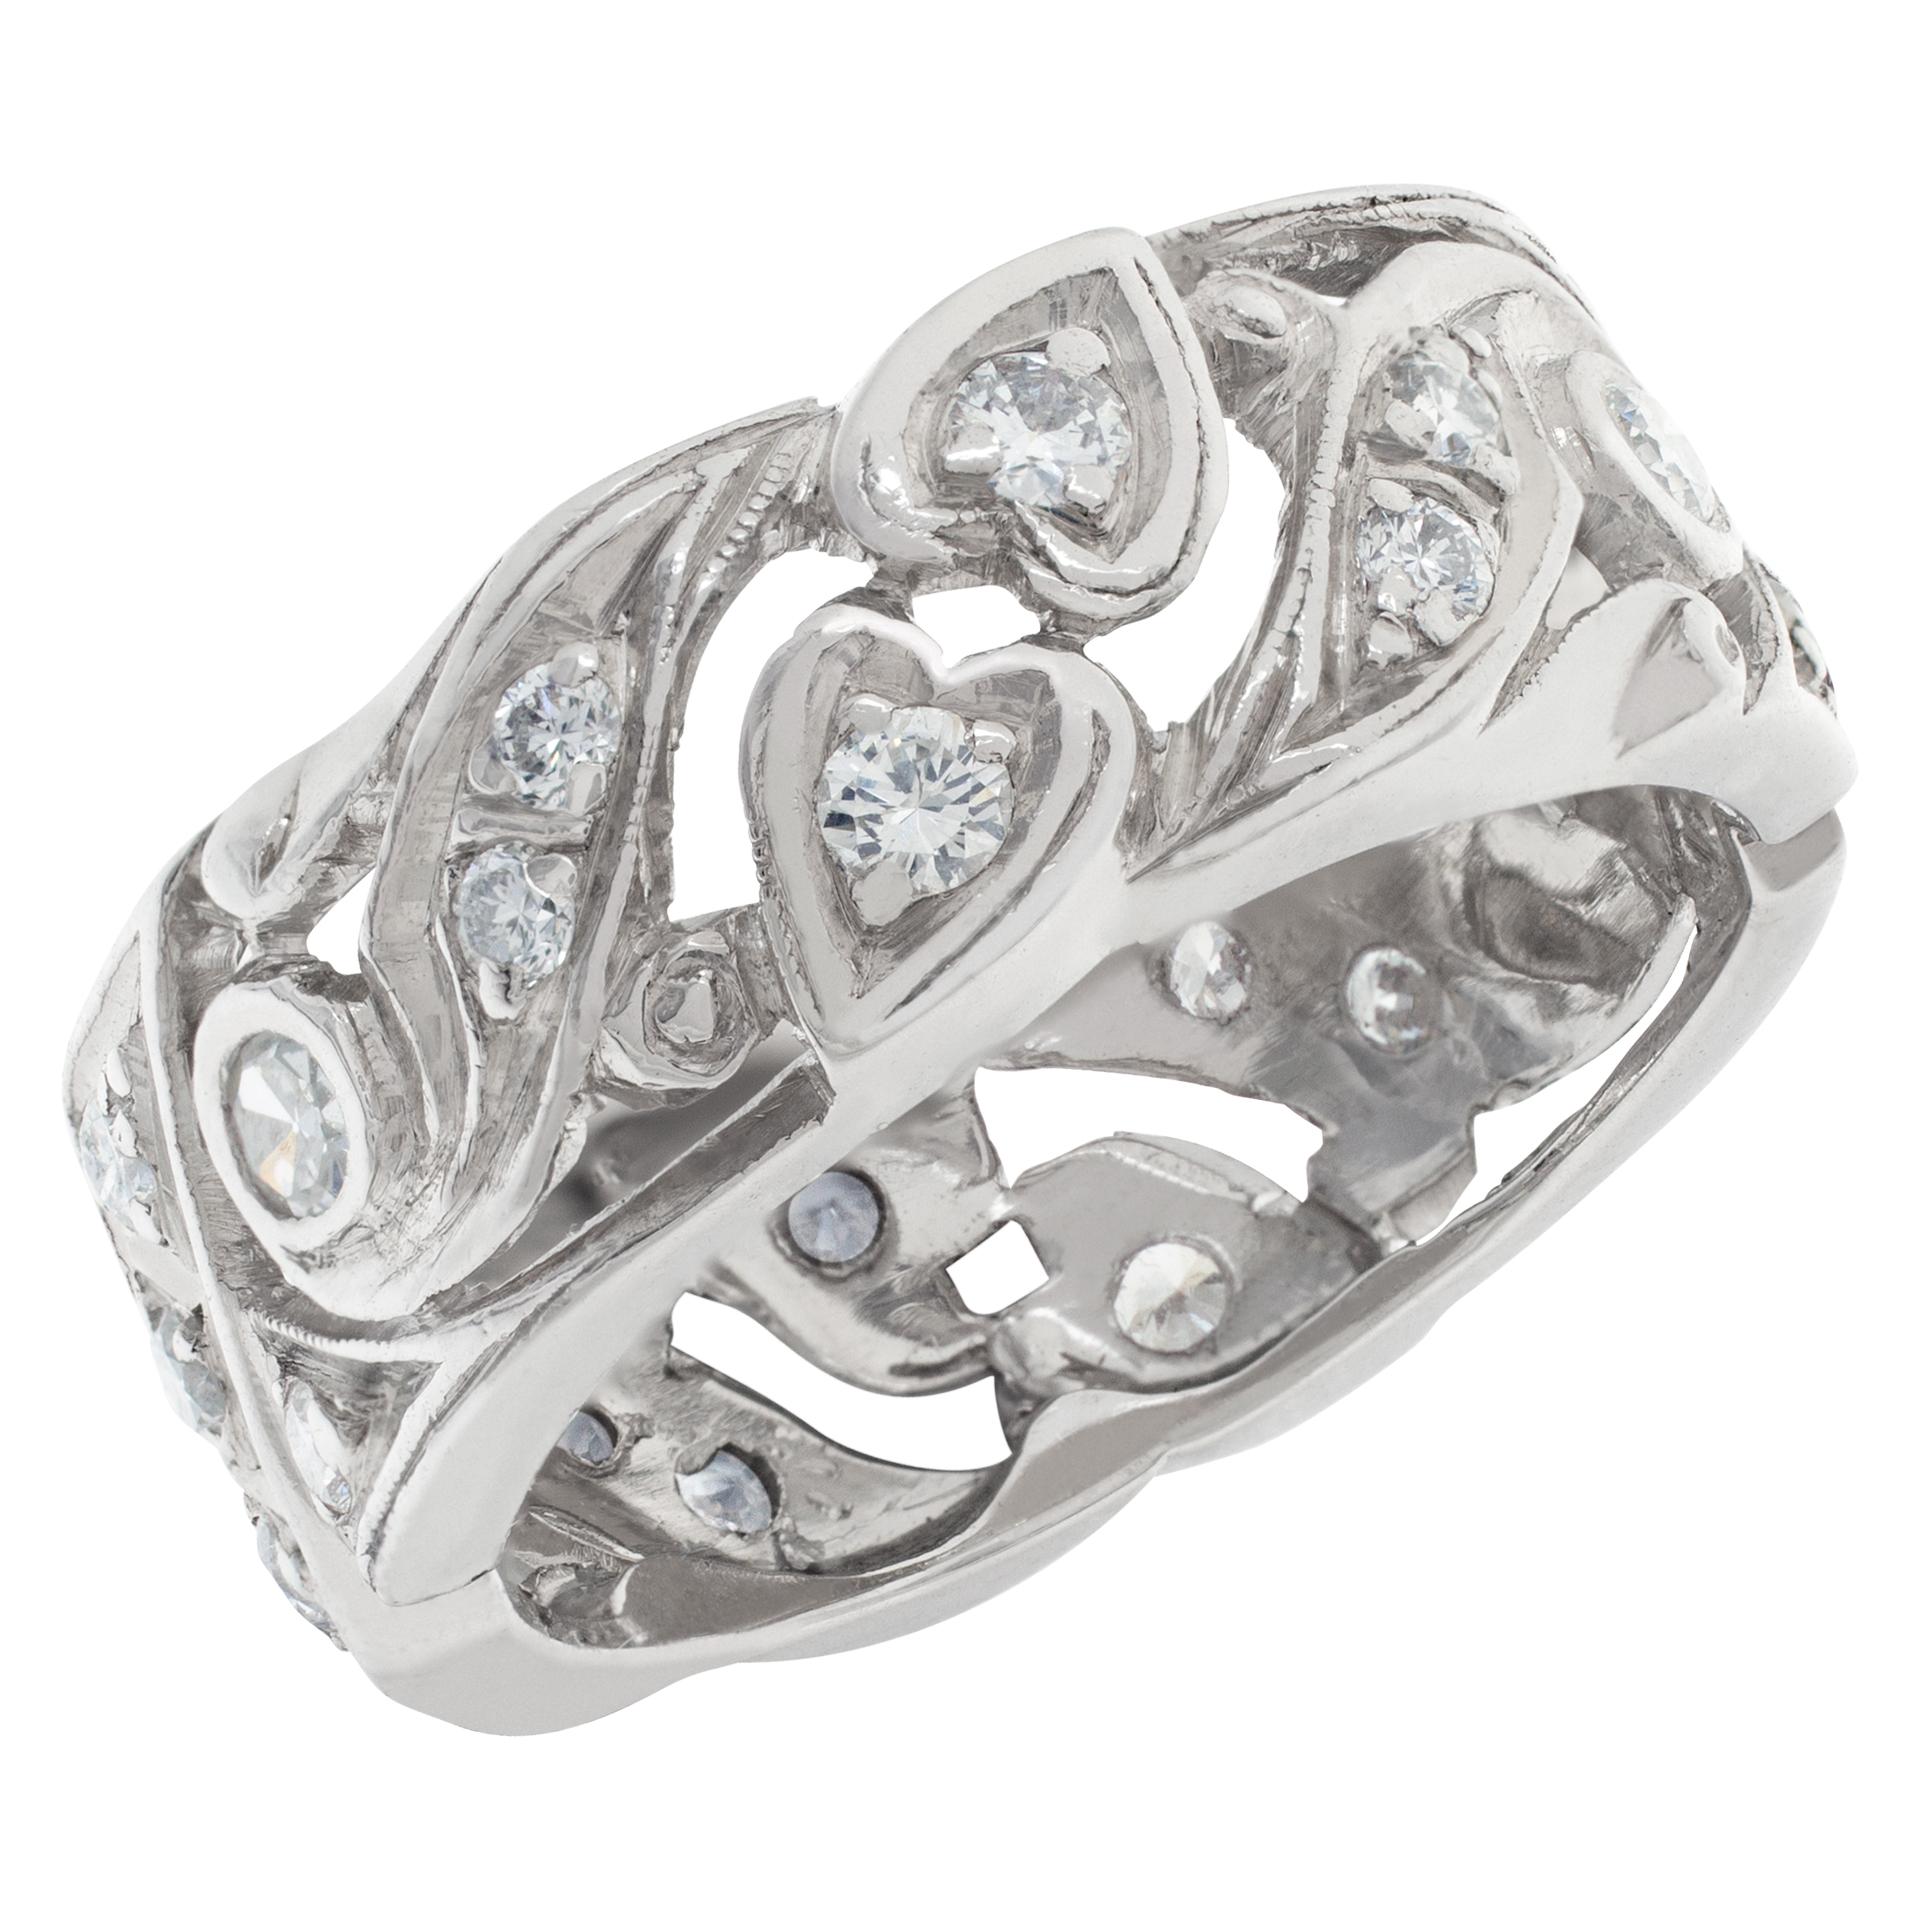 Round Cut Diamond Ring in 14k White Gold, 0.50 Carats, Magical X-Design Pavé For Sale